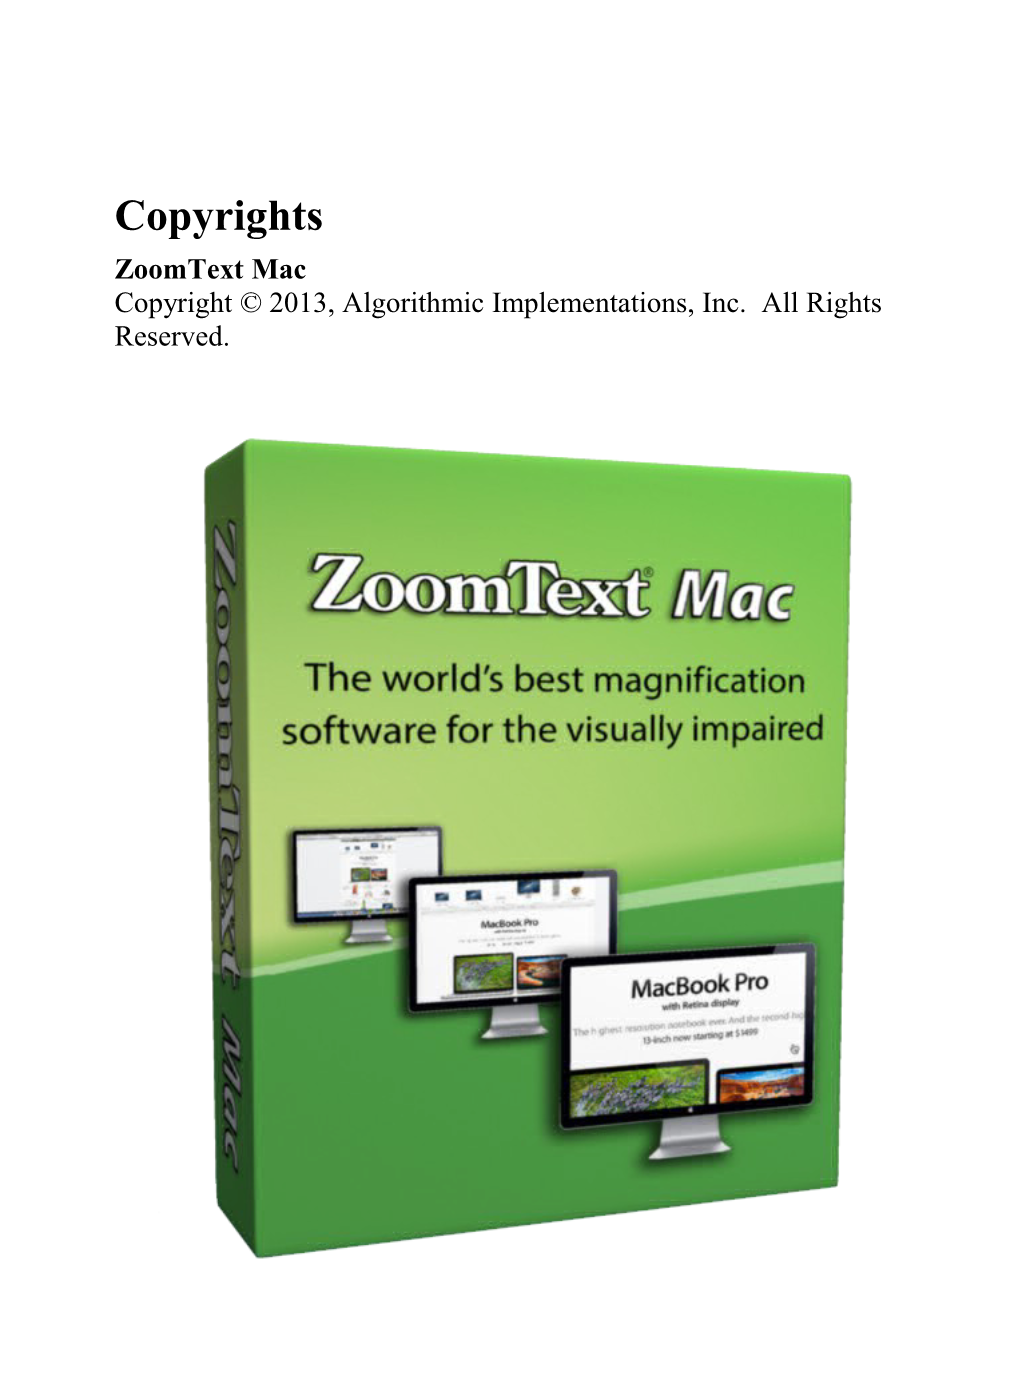 Zoomtext and Zoomtext Mac Are Registered Trademarks of Algorithmic Implementations, Inc